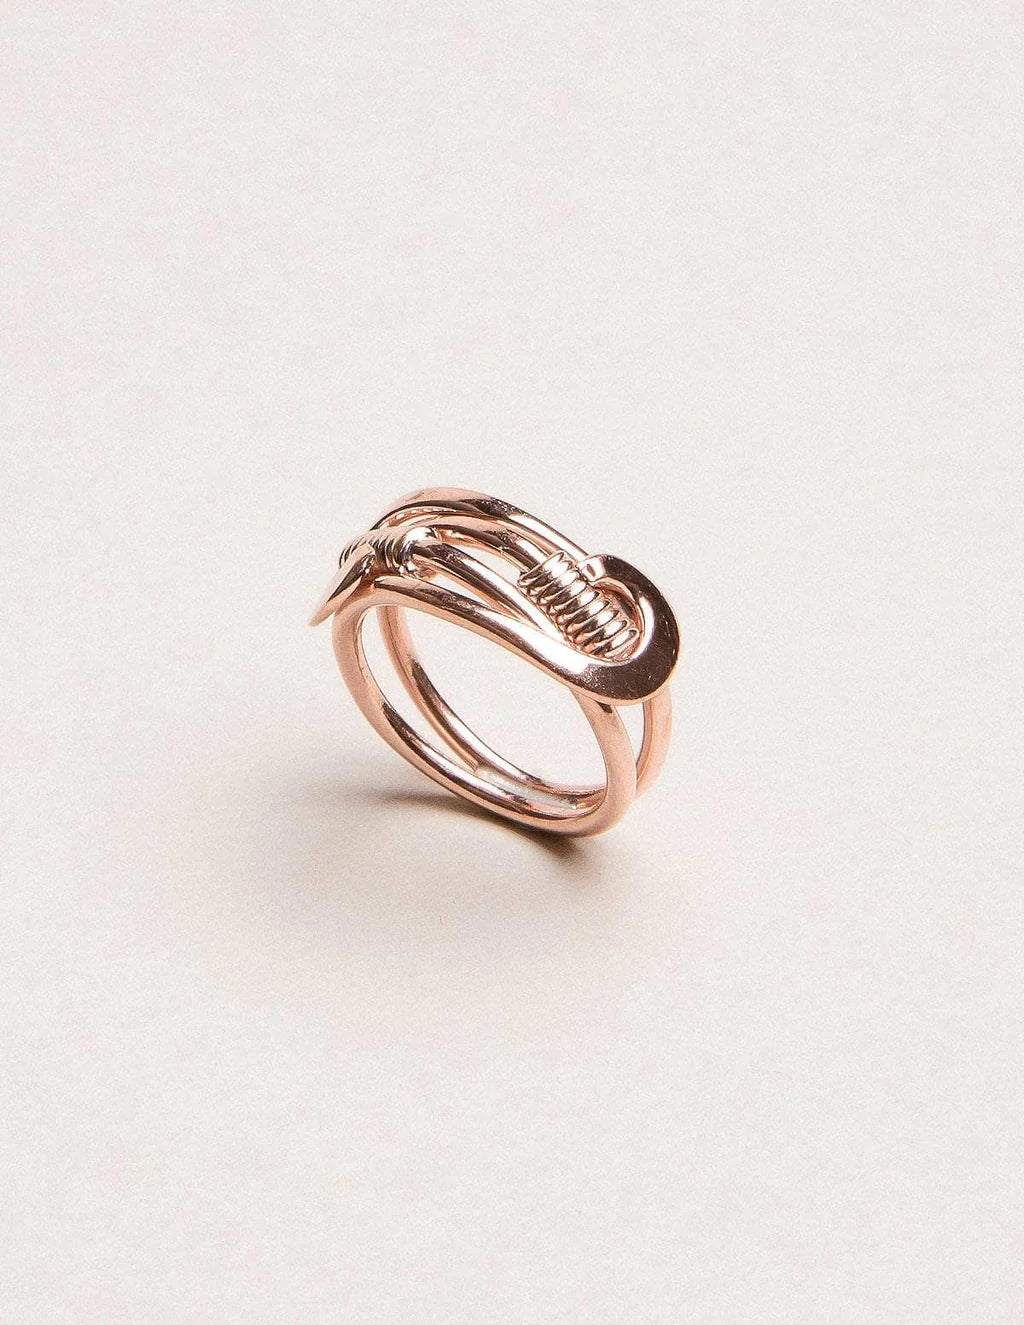 I ordered a copper snake ring from Isha. Can we eat non-vegetarian food by  wearing the ring? Can we keep the ring on all the time? - Quora